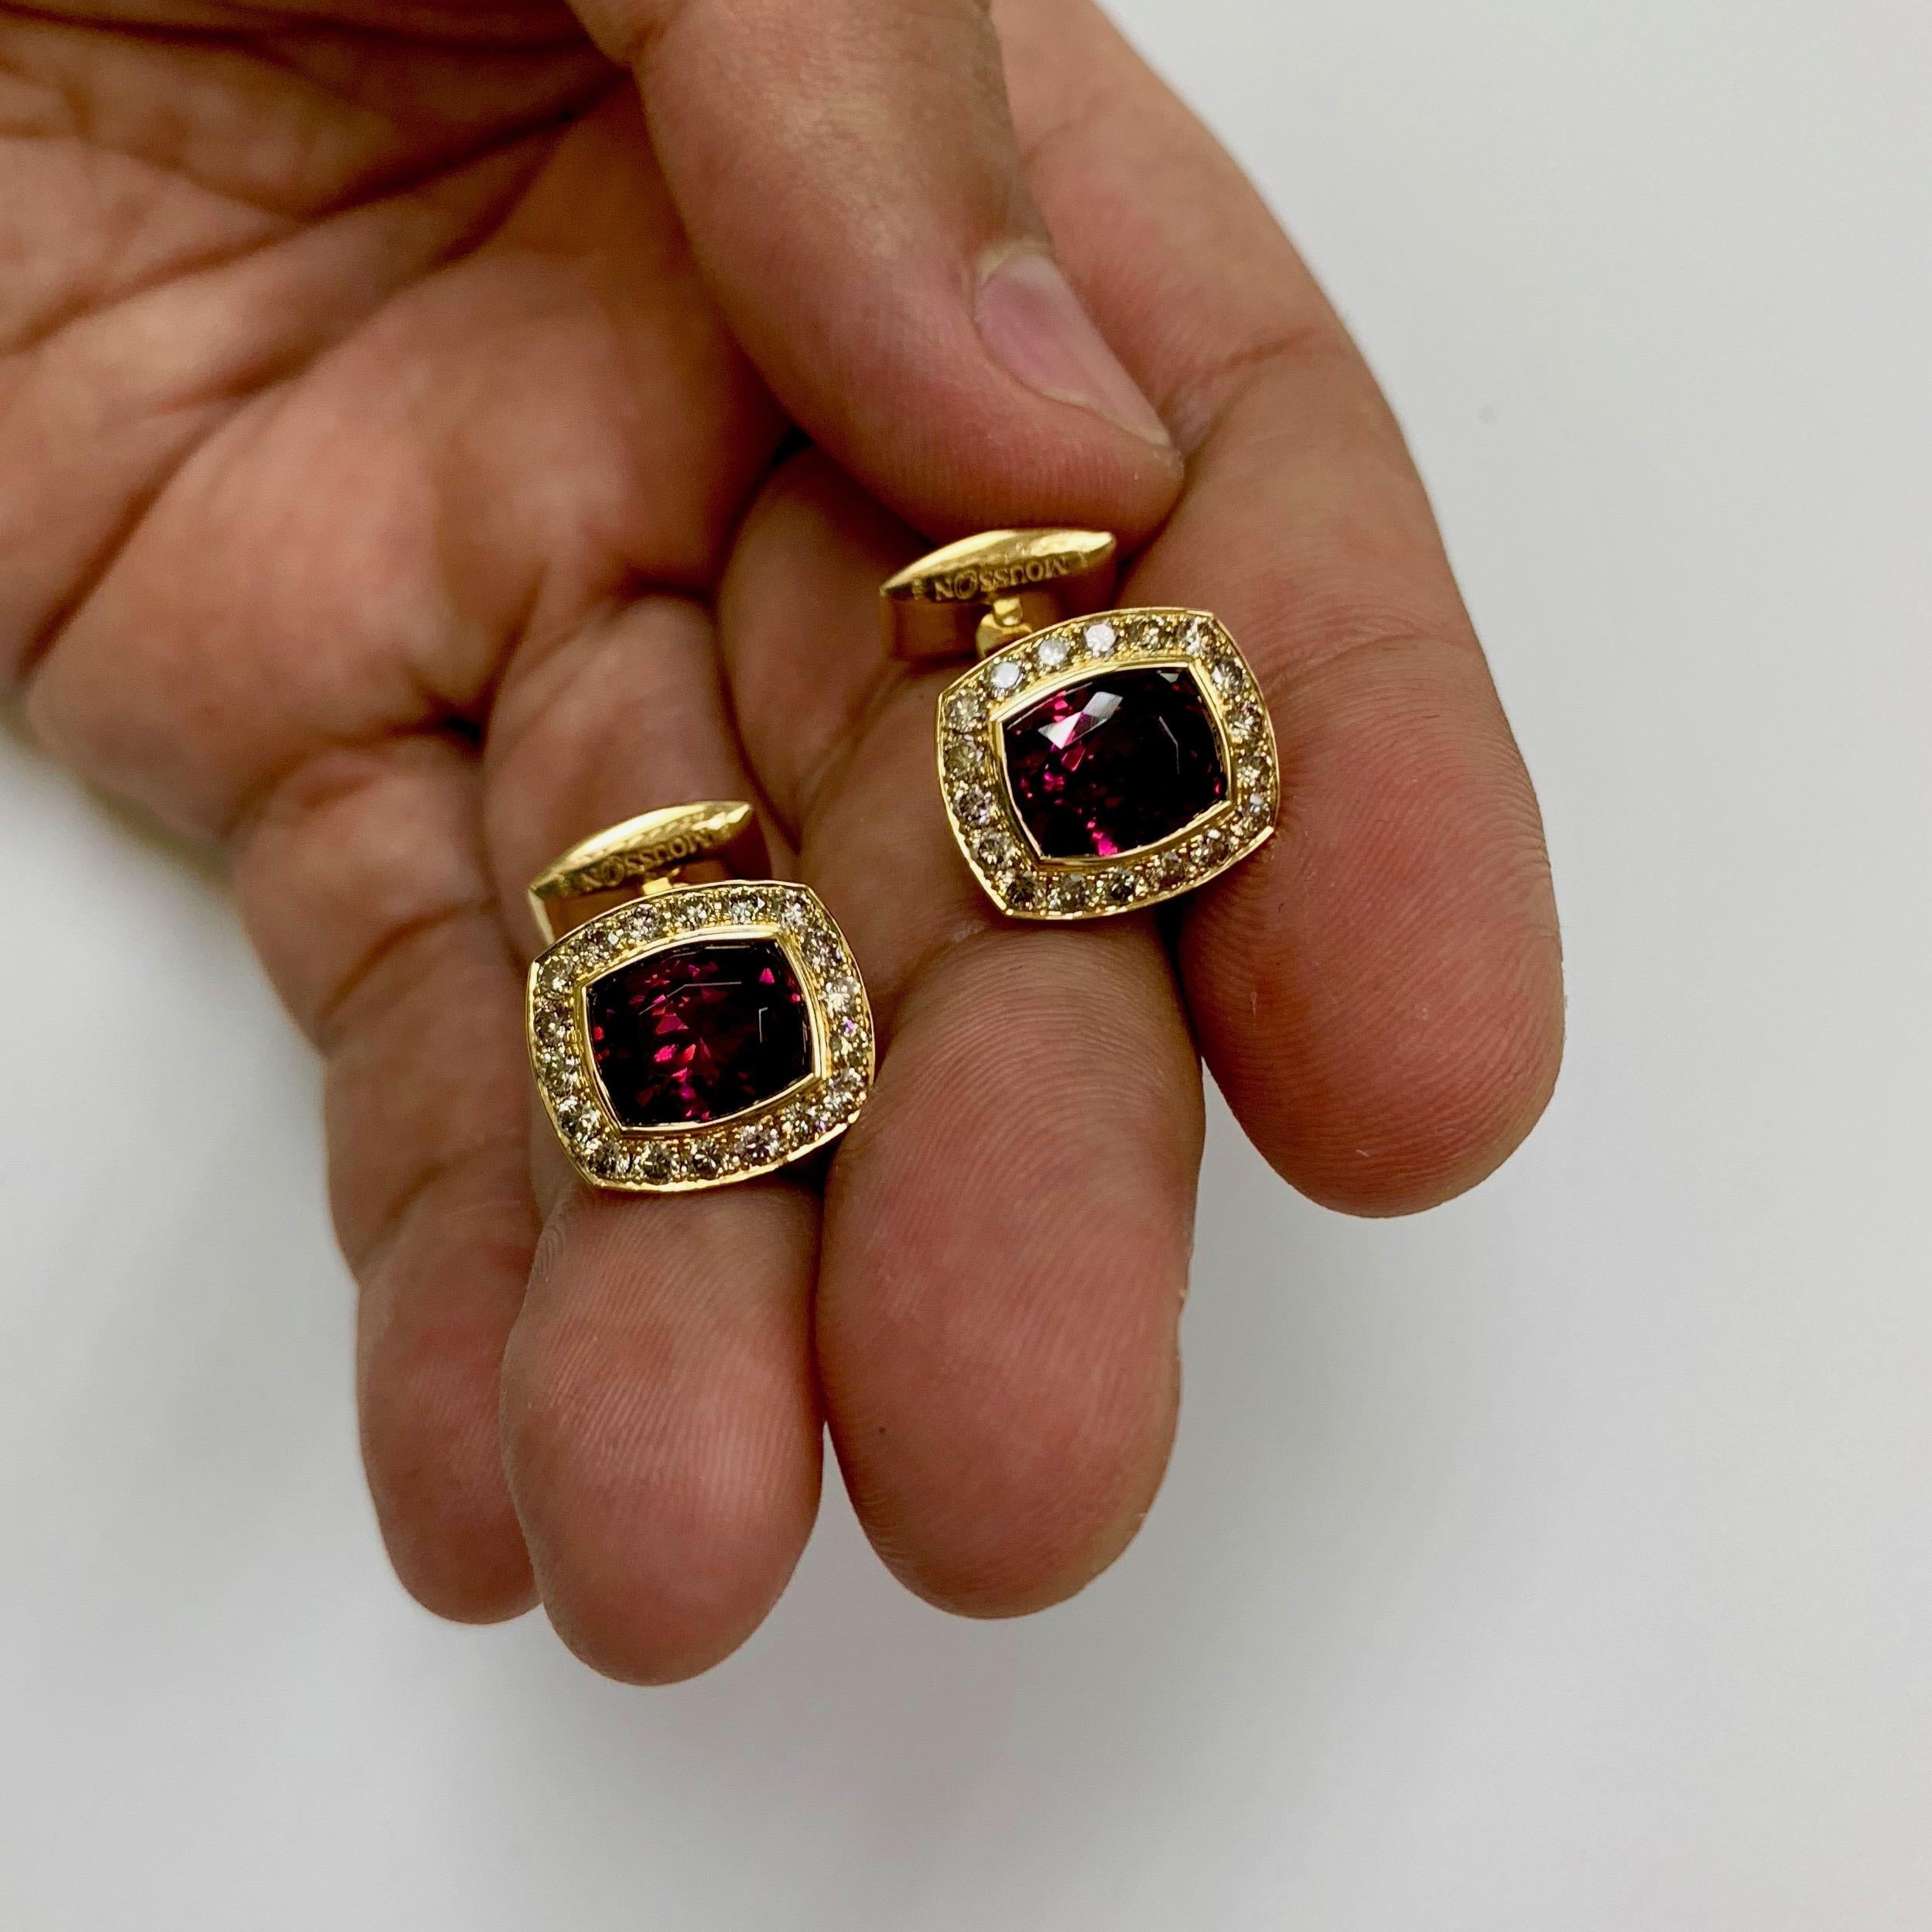 Rhodolite Garnet Diamonds 18 Karat Yellow Gold Male Enamel Cufflinks
Our worldwide famous Kaleidoscope collection. Male version out now.
For Men who tired of boring ordinary things. Be different. Be brighter than others.
Accompanied with the Ring